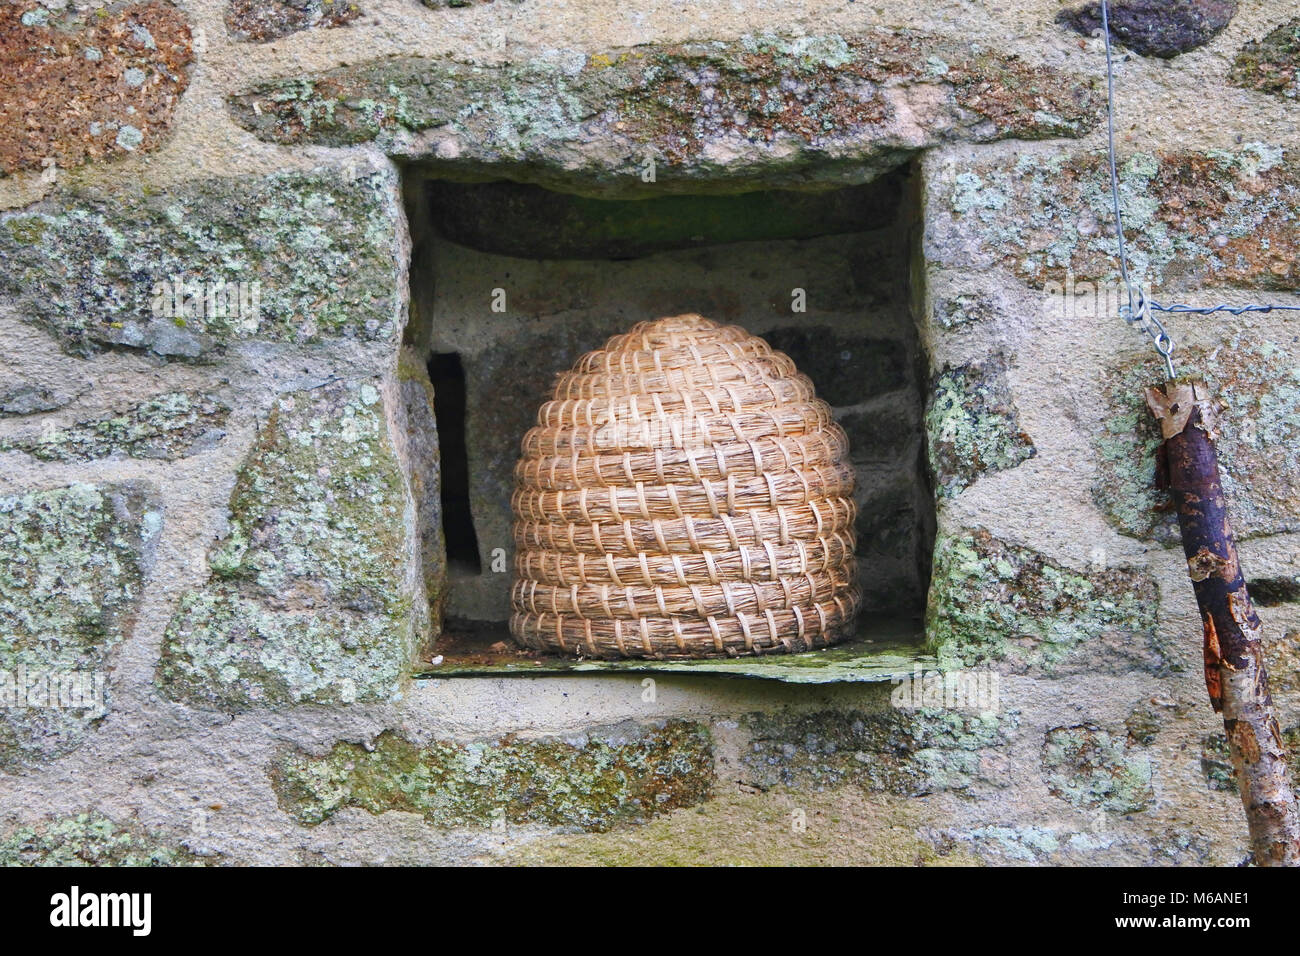 A traditional beehive or skep in an English winter country garden - John Gollop Stock Photo